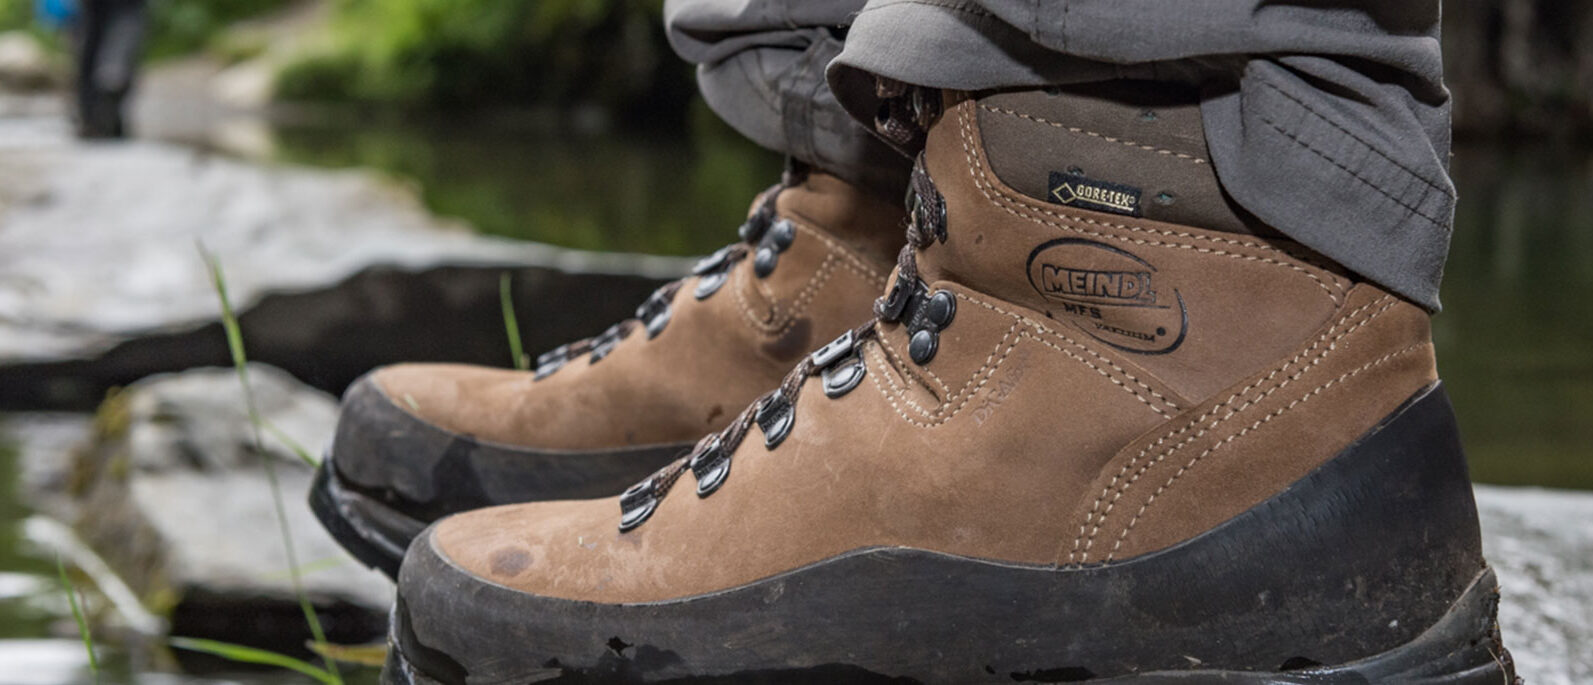 Meindl Boots for hiking